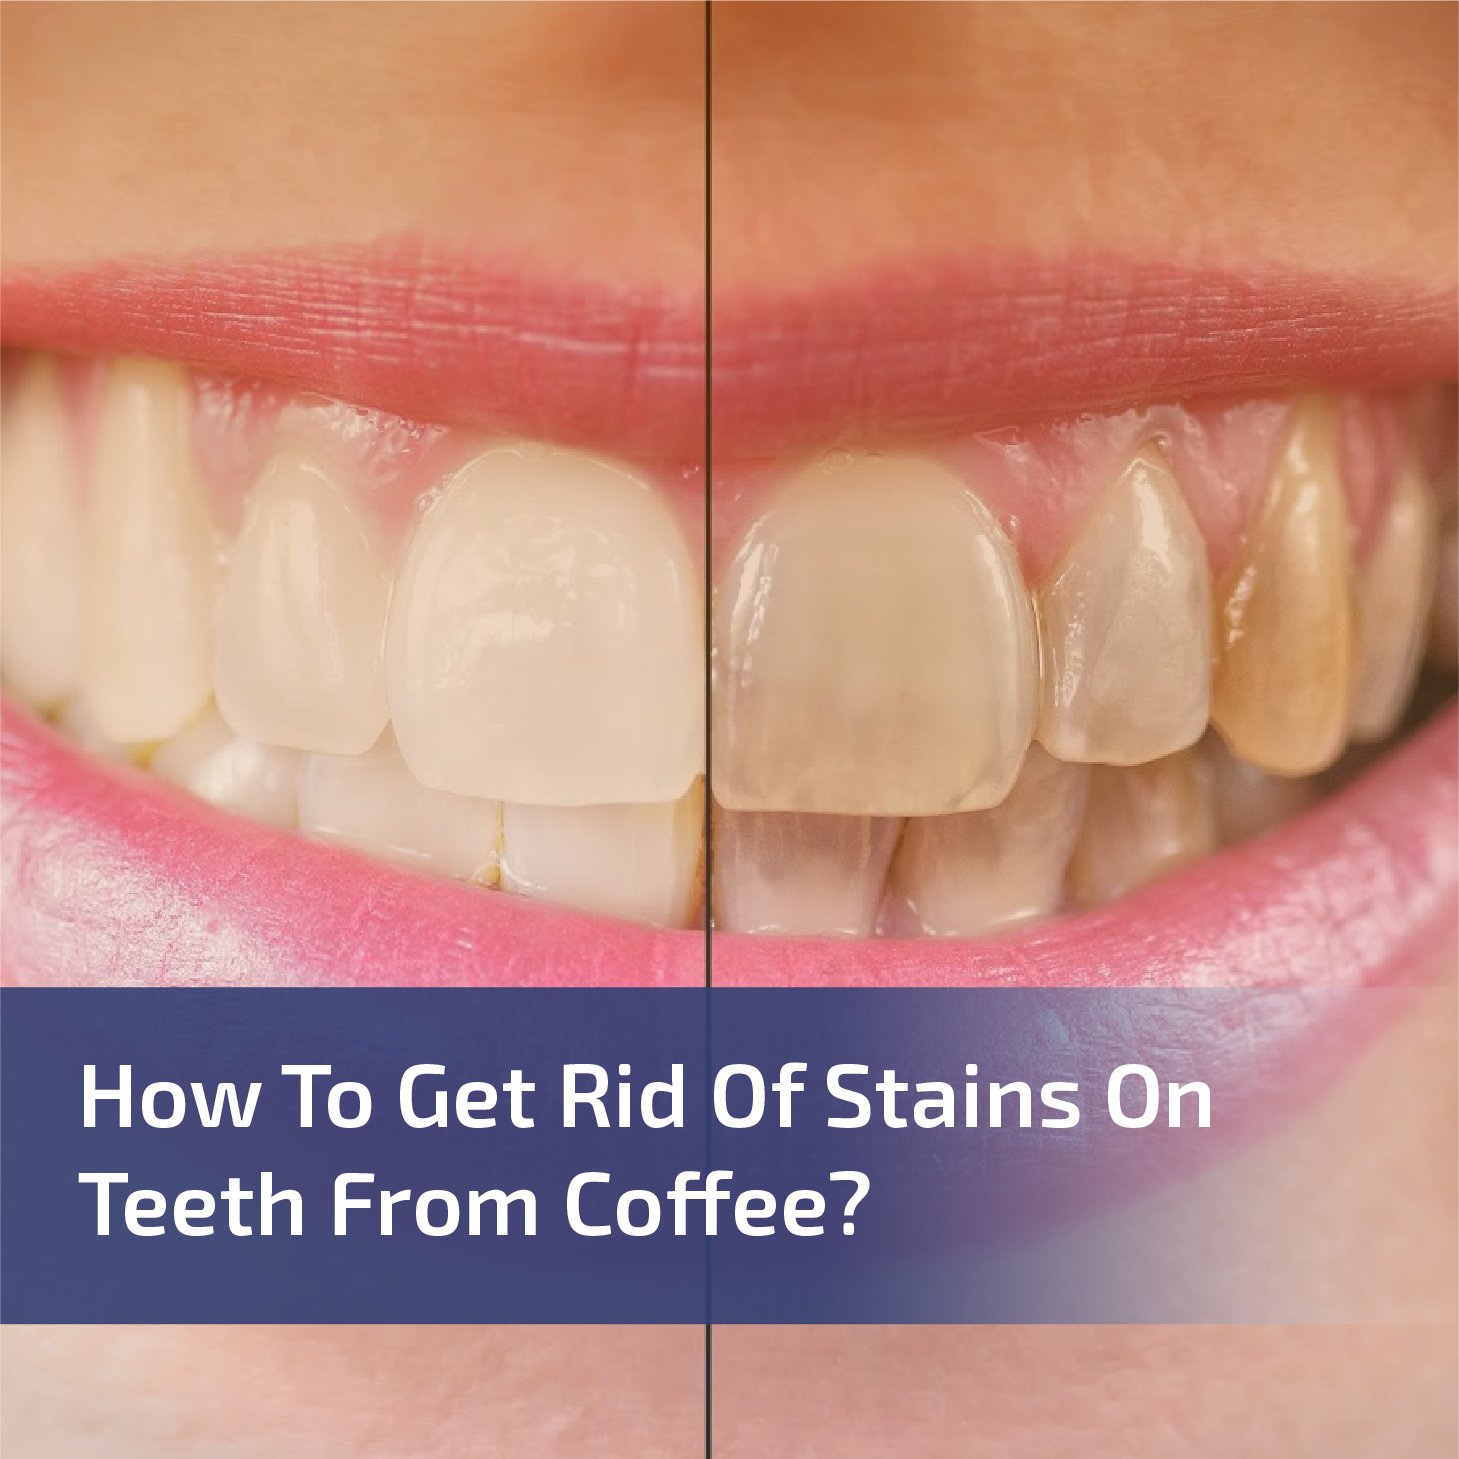 How to Get Rid of Stains on Teeth From Coffee